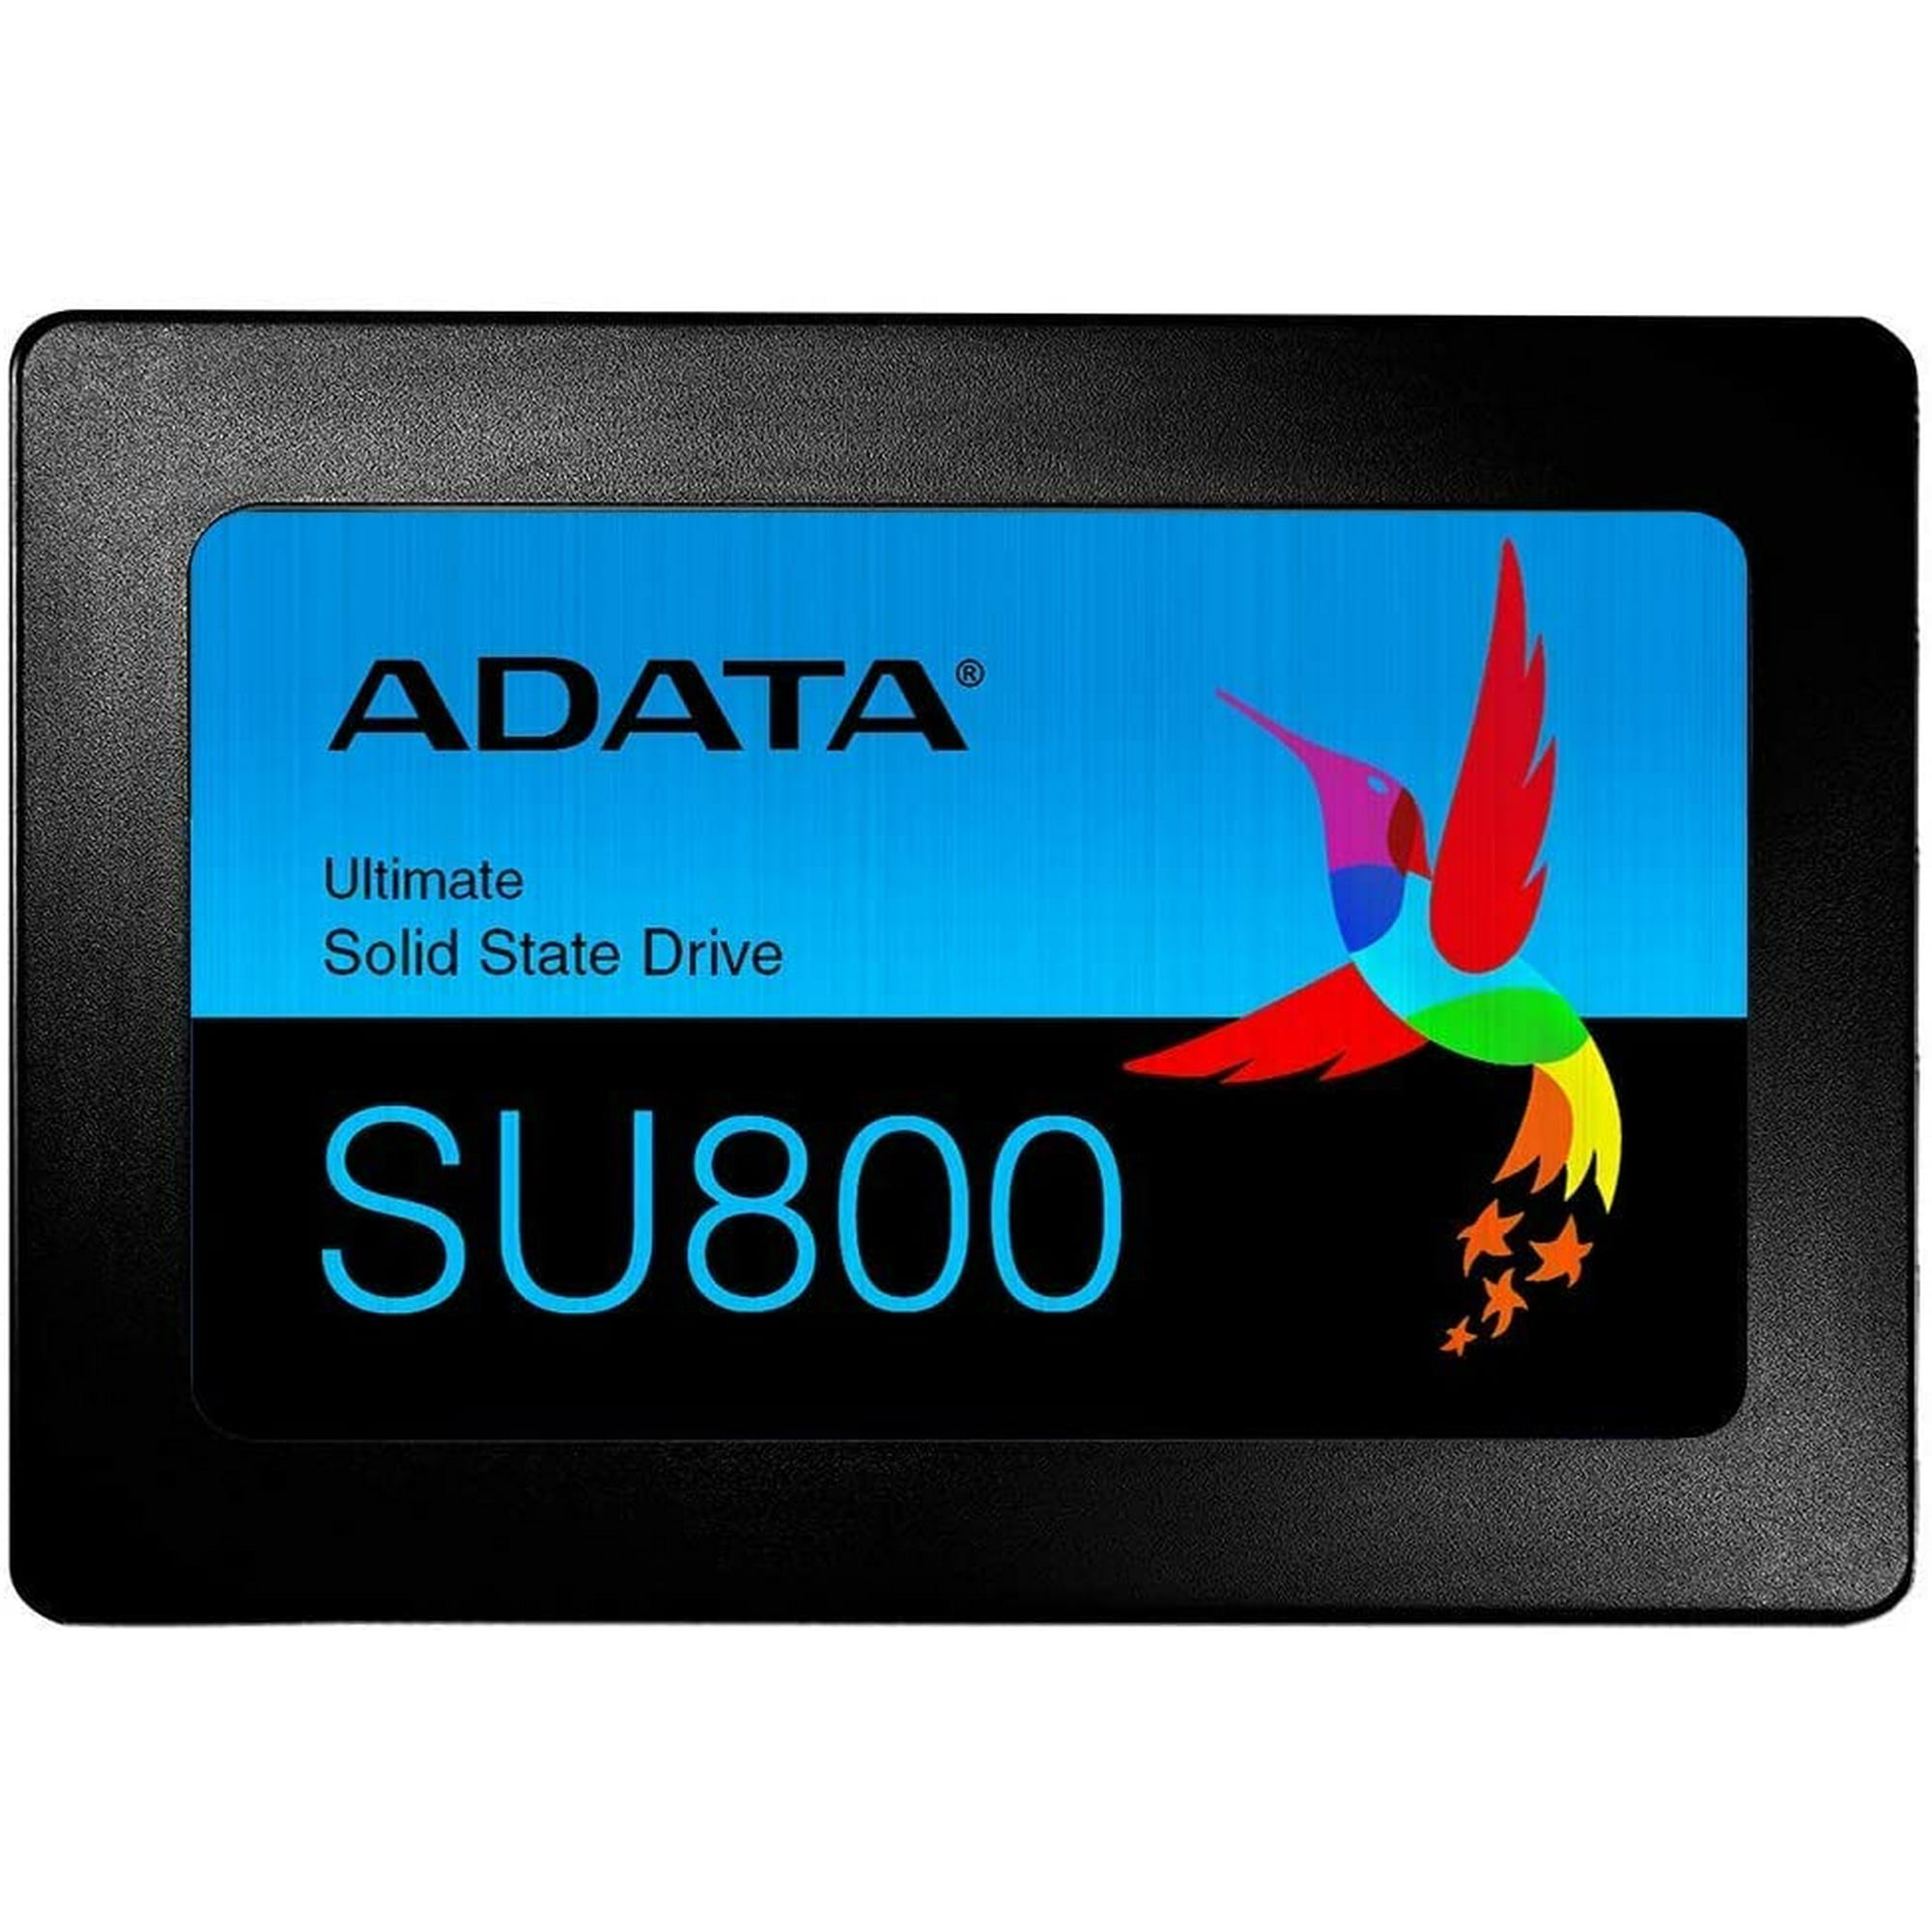 ADATA SU800 256GB 3D-NAND 2.5 Inch SATA III High Speed Read & Write up to  560MB/s & 520MB/s Solid State Drive